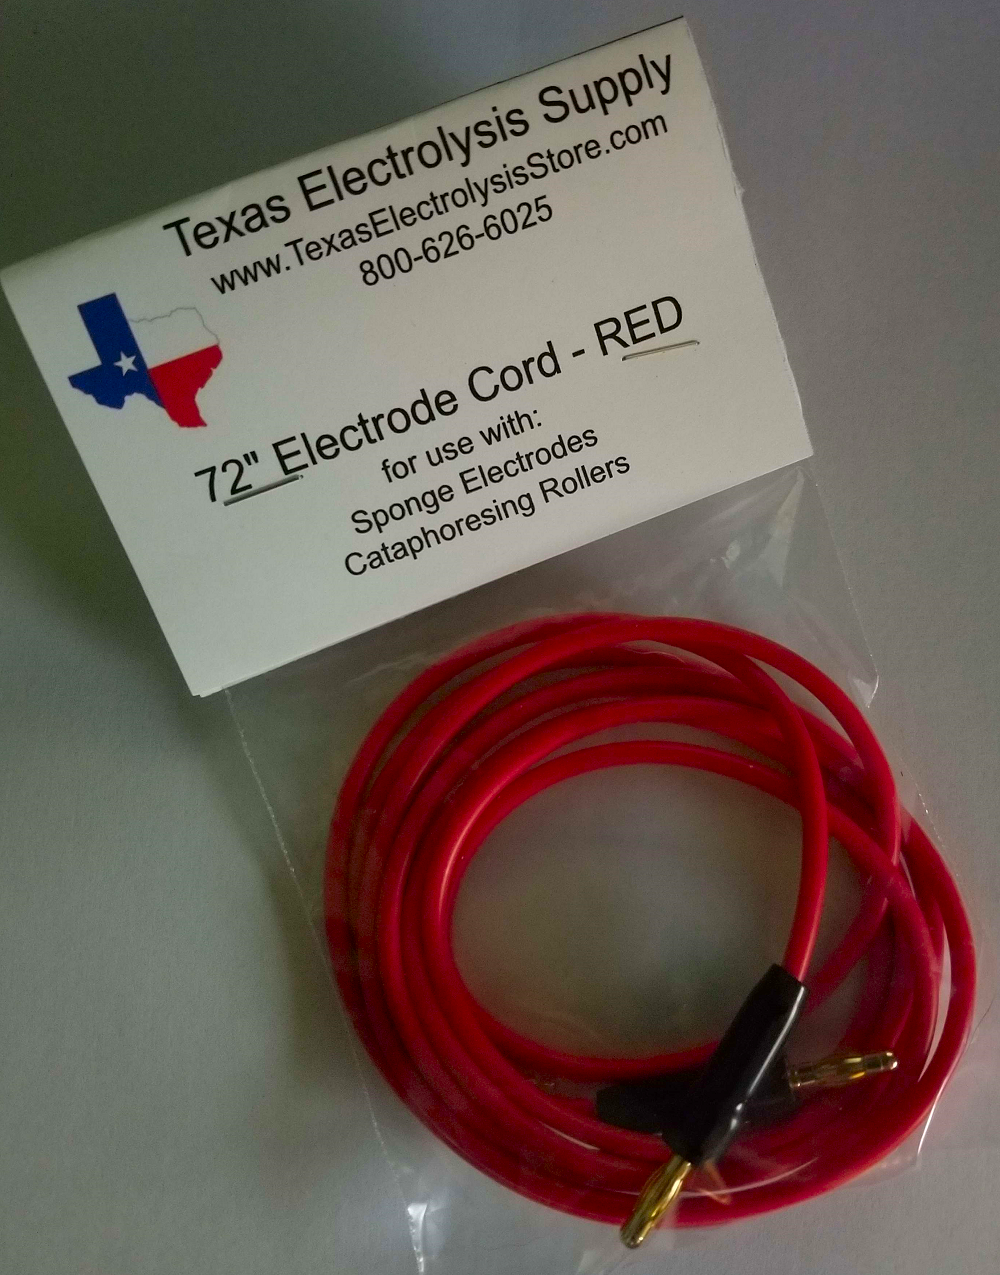 Electrode Cord - RED